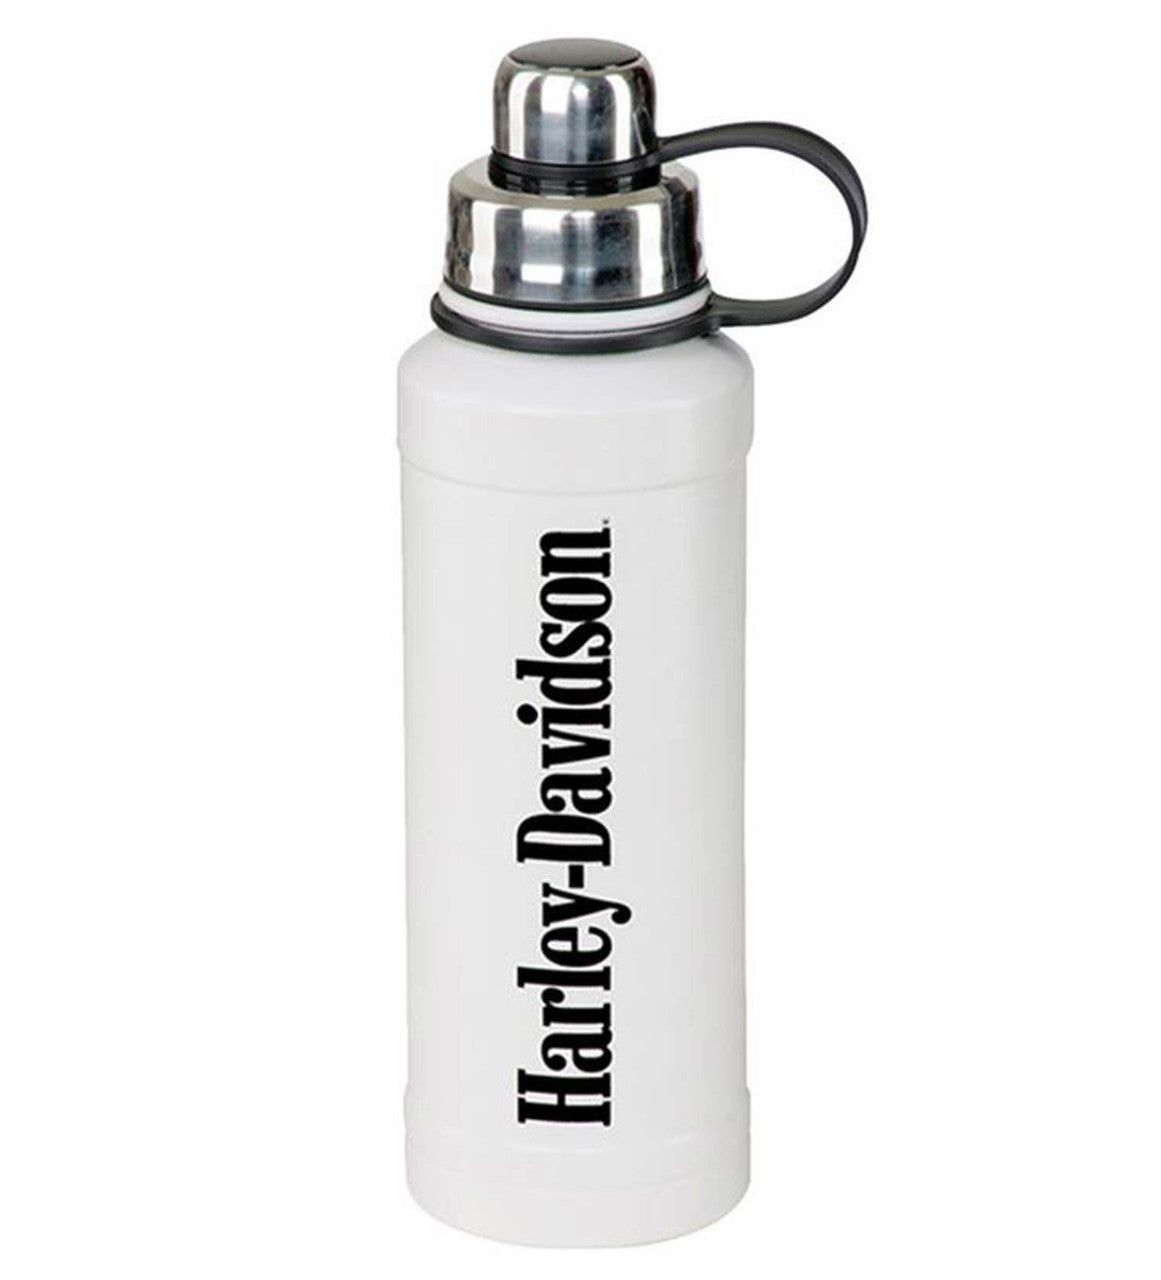 Harley-Davidson Stainless Steel Vacuum Insulated Travel Bottle